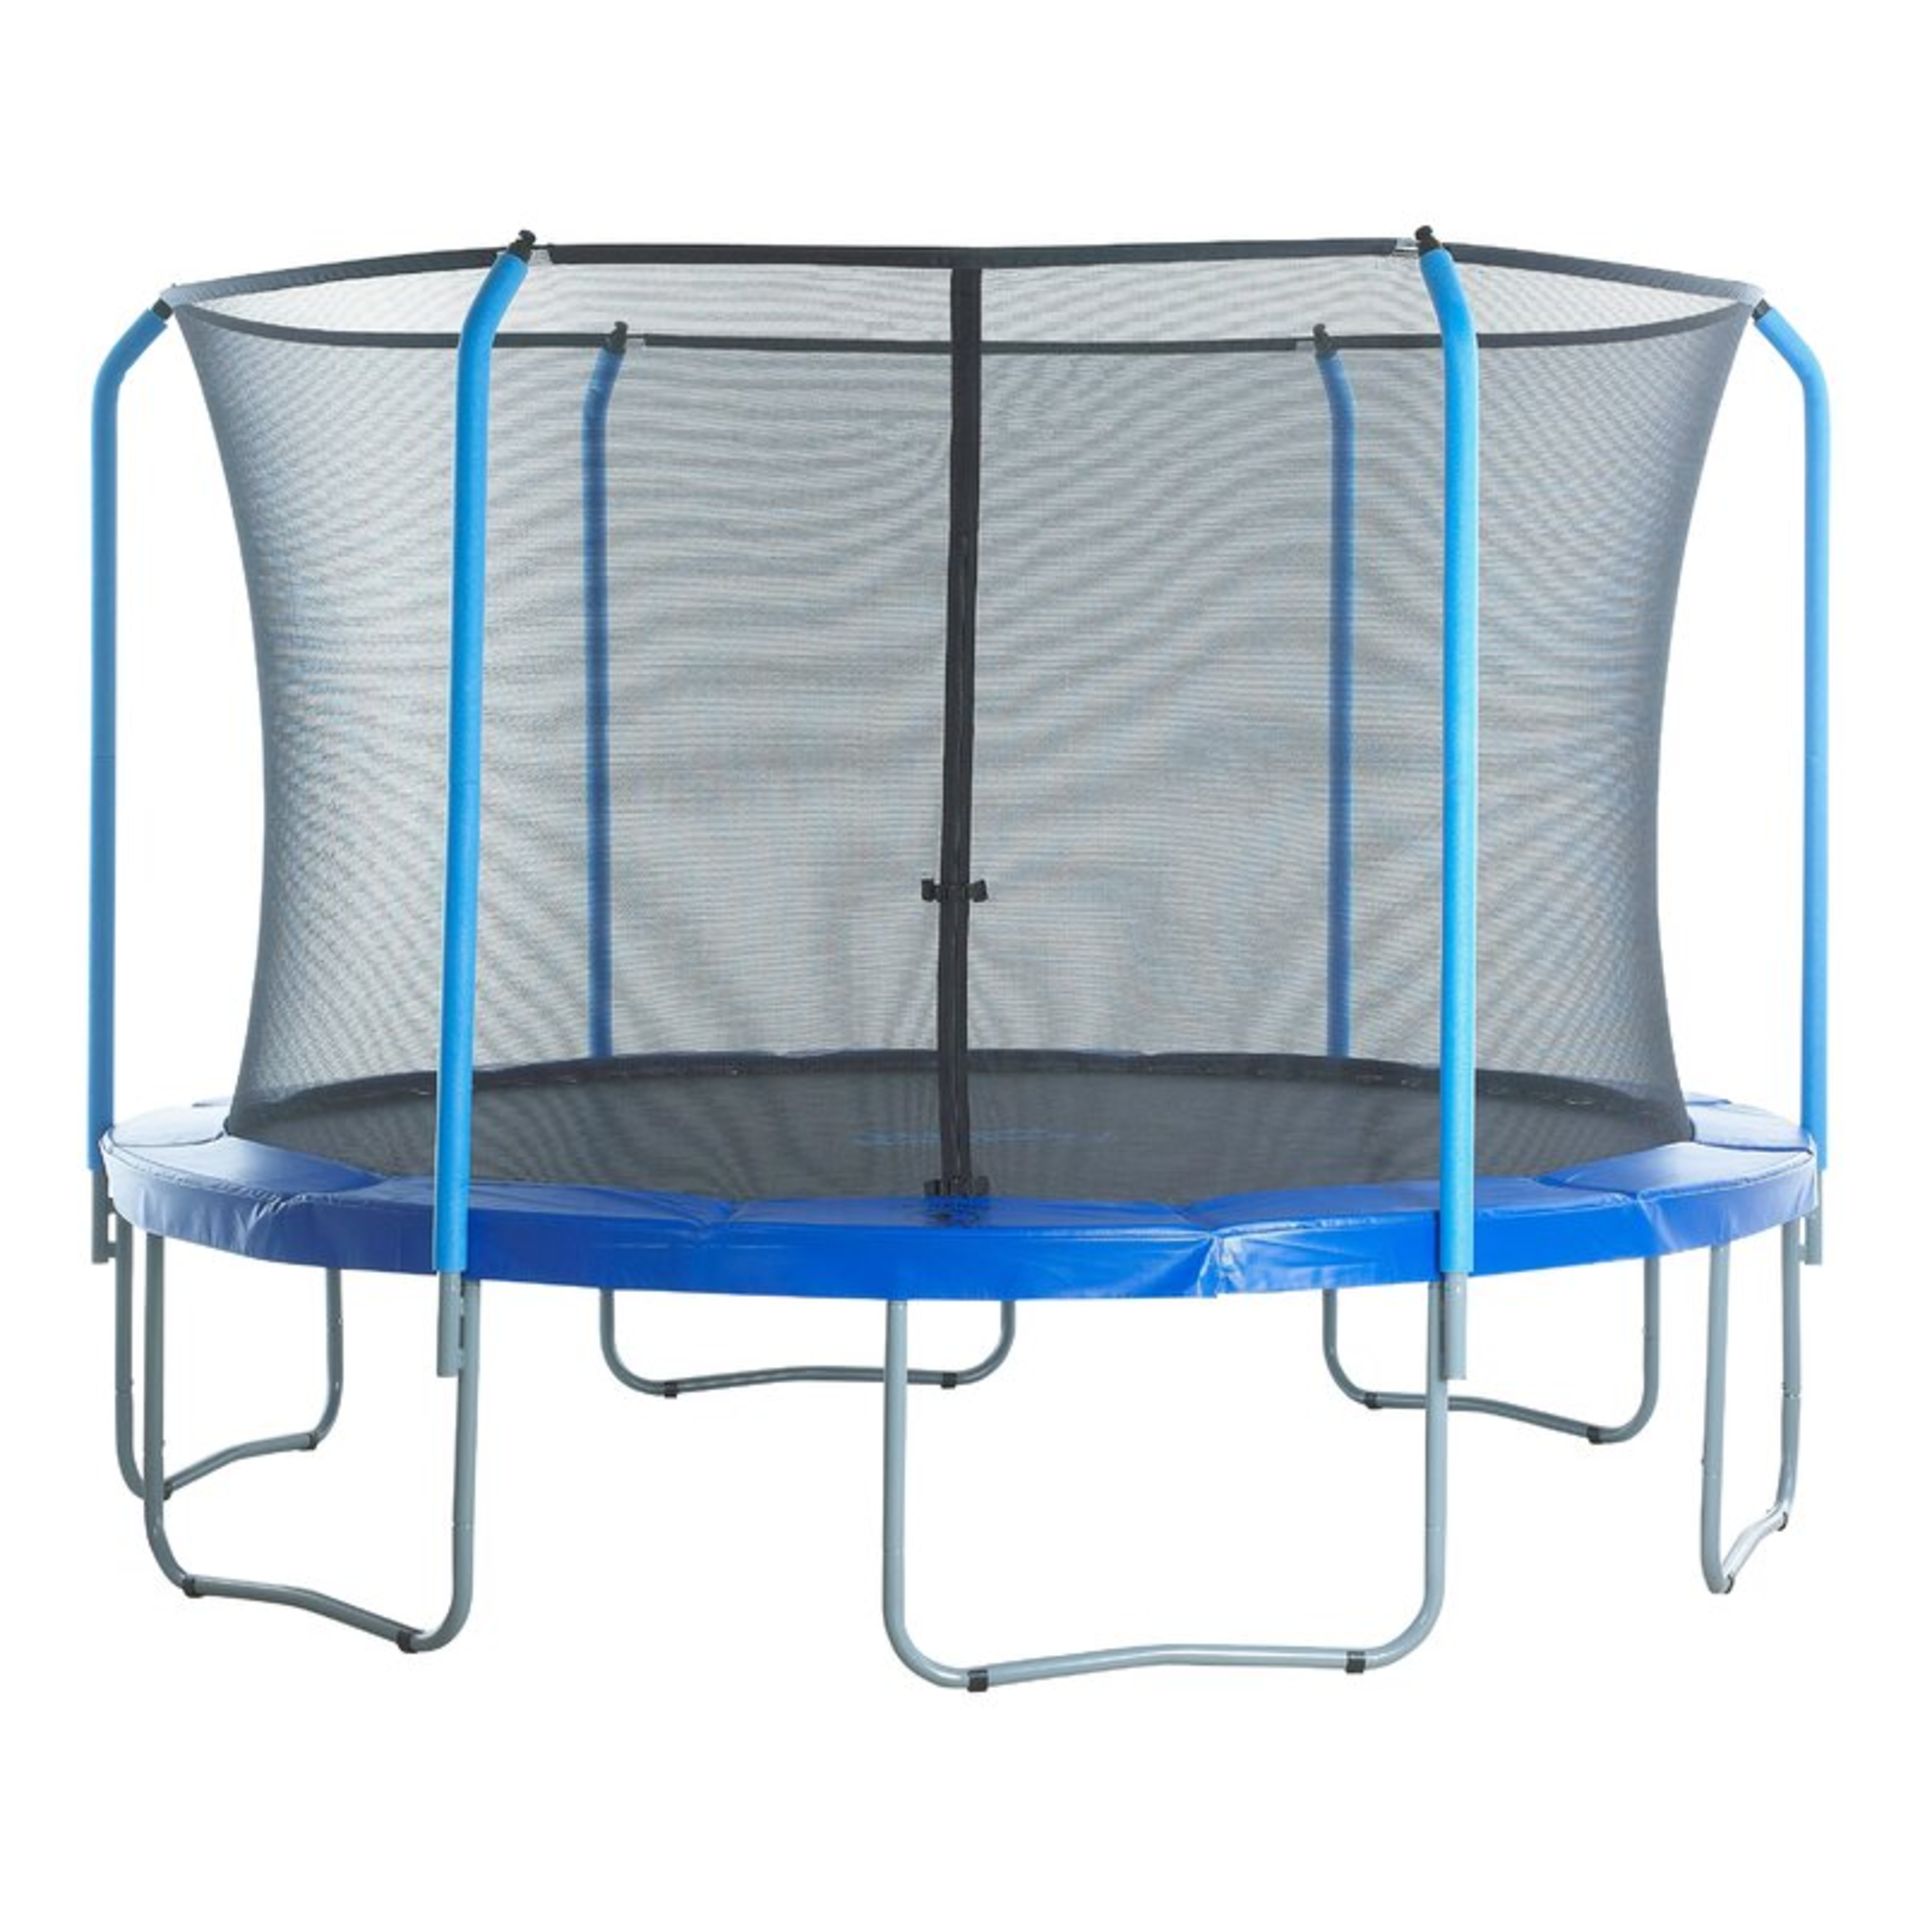 366cm Round Trampoline Net using 6 Poles Net Only - RRP £103.99